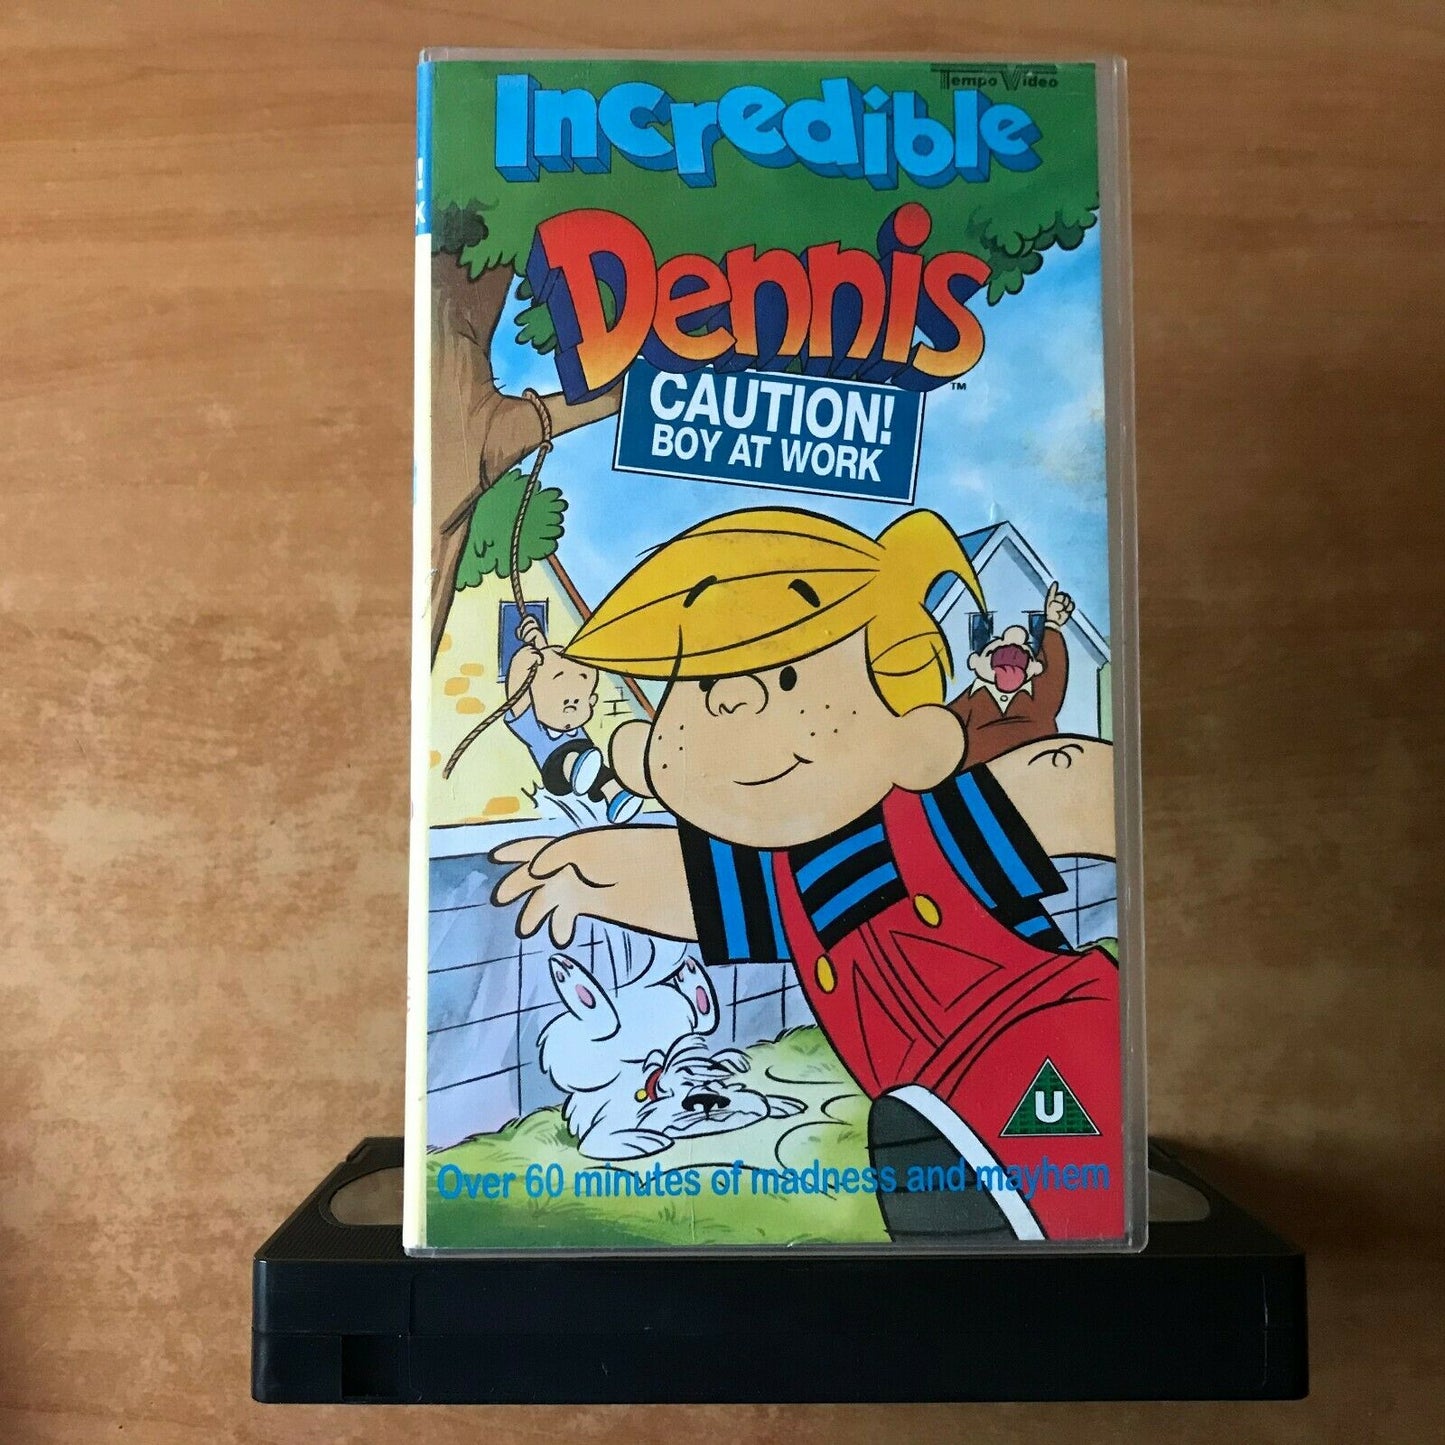 Incredible Dennis: "Caution! Boy At Work" [Tempo Video] Animated - Kids - VHS-